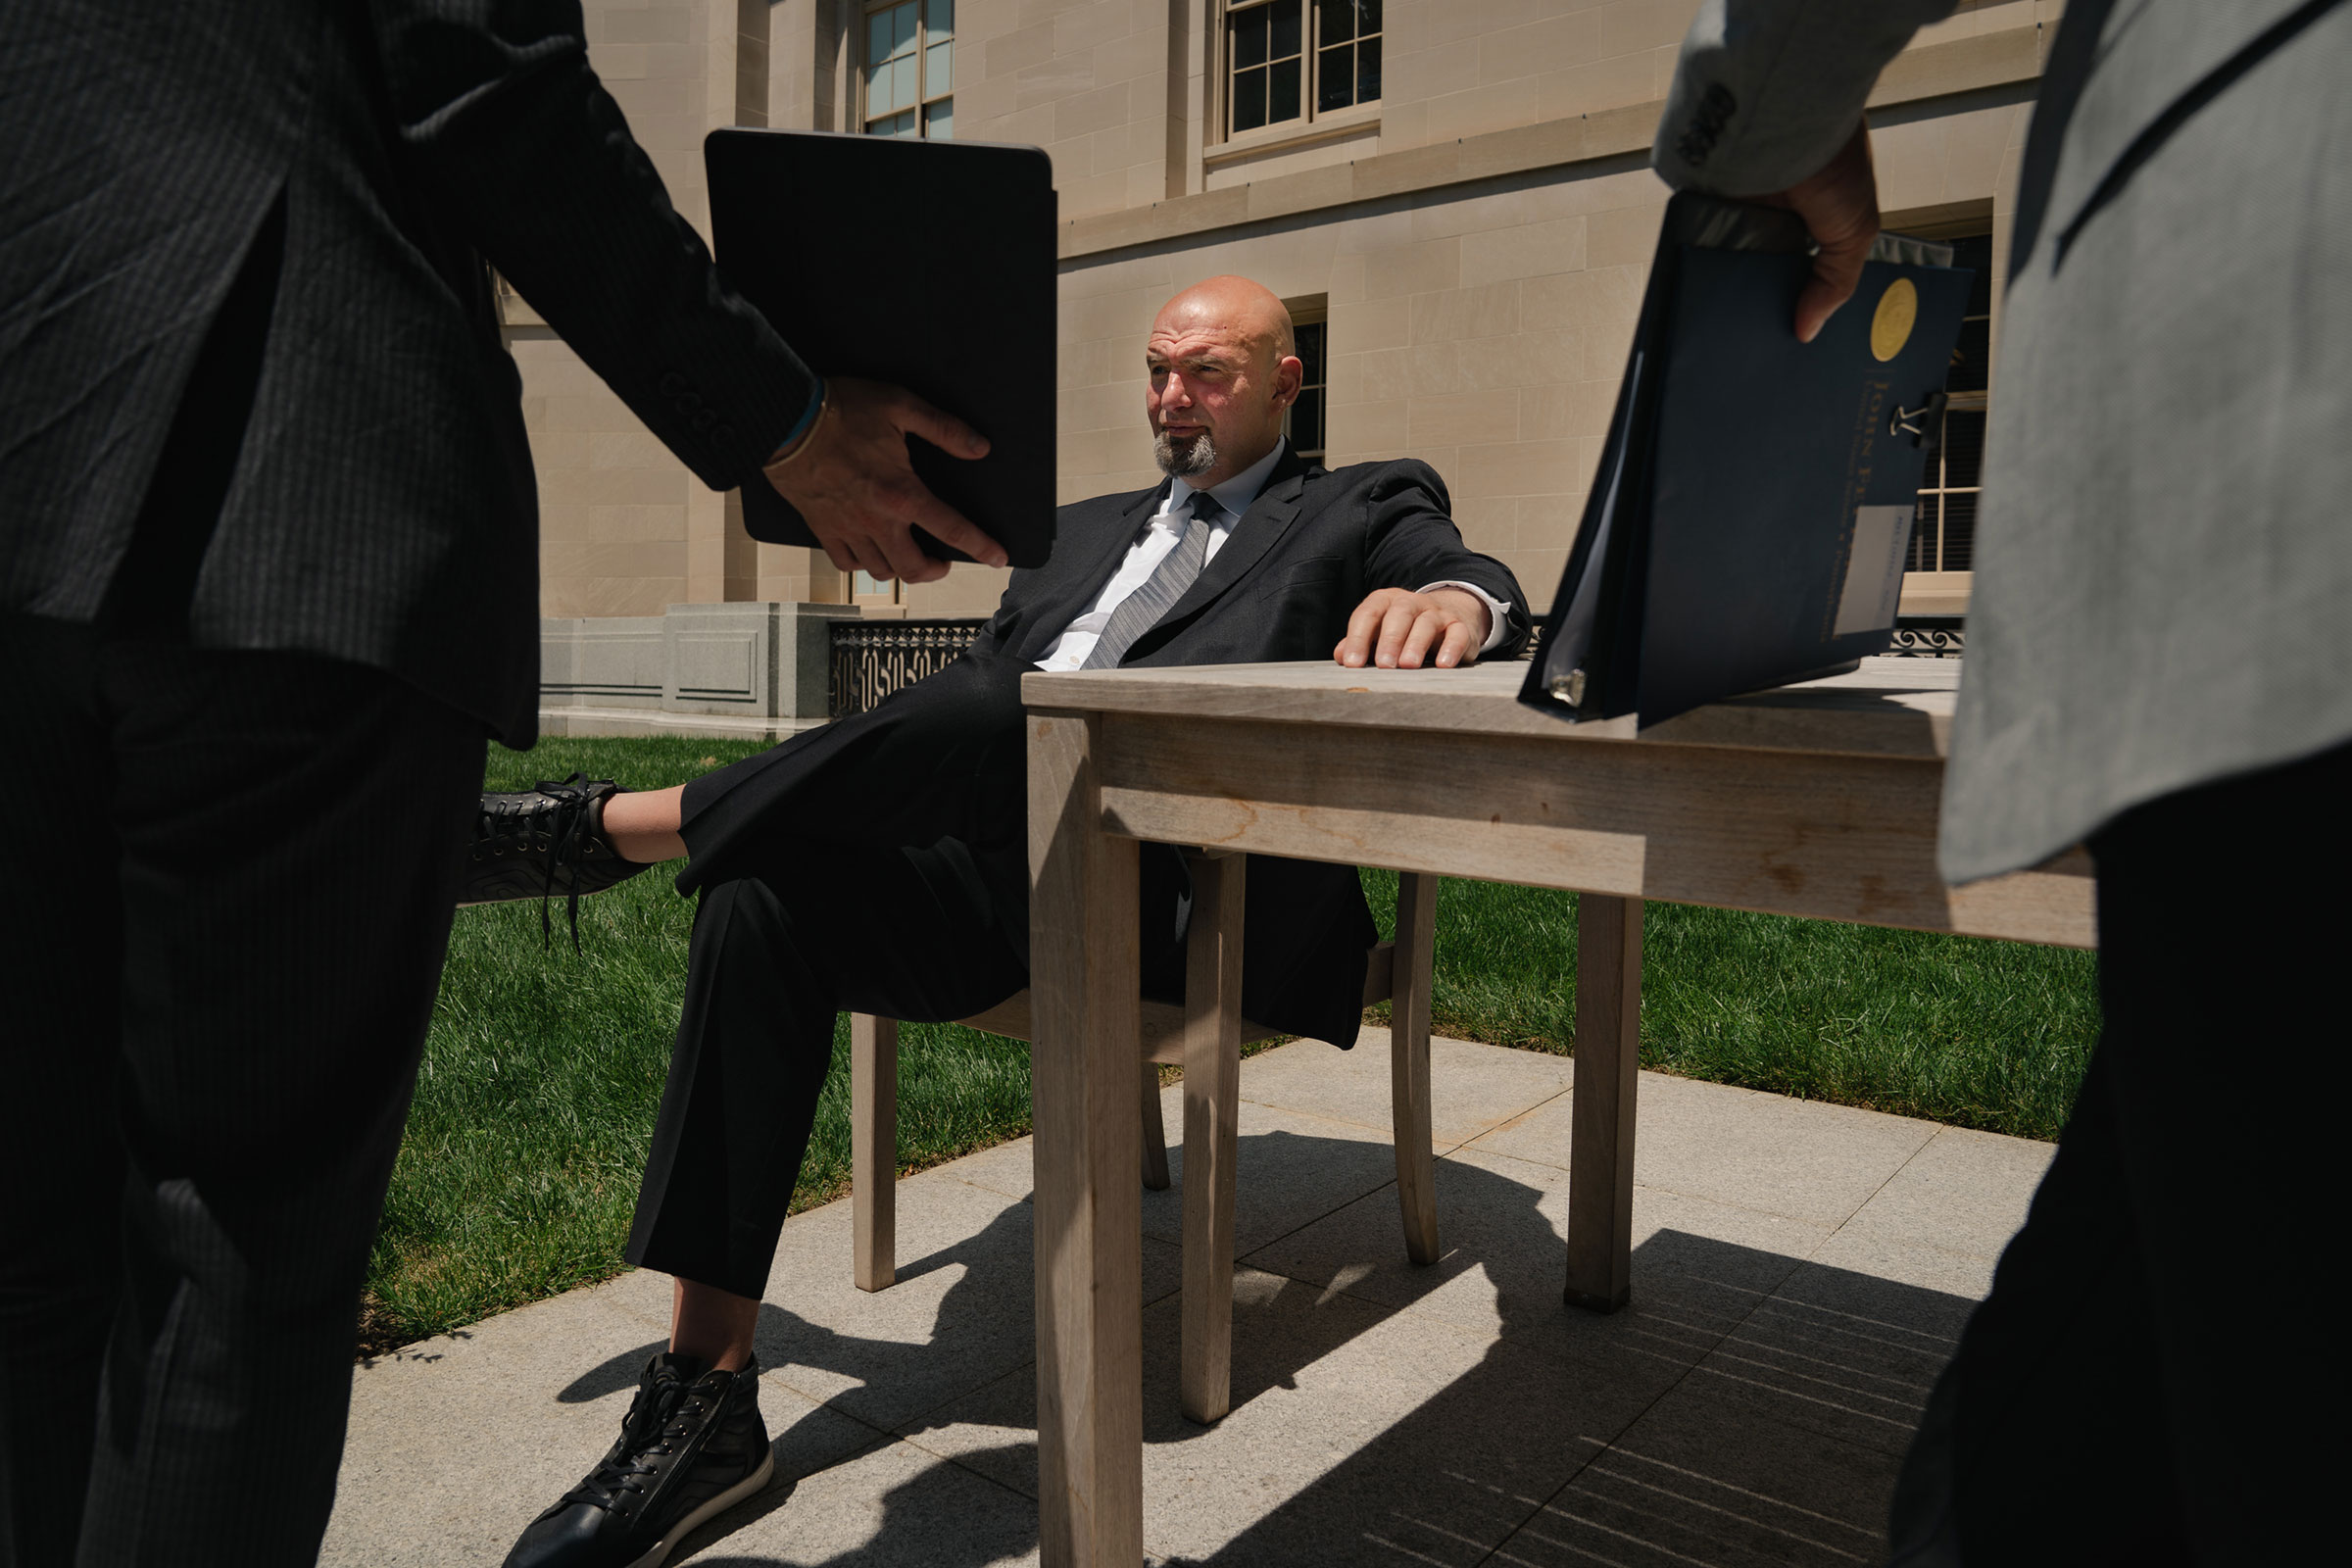 Senator John Fetterman sits in a chair outside in a courtyard in the sun as two other men show him a binder and an ipad, which has a prompter on it so he can have captions of what people around him are saying